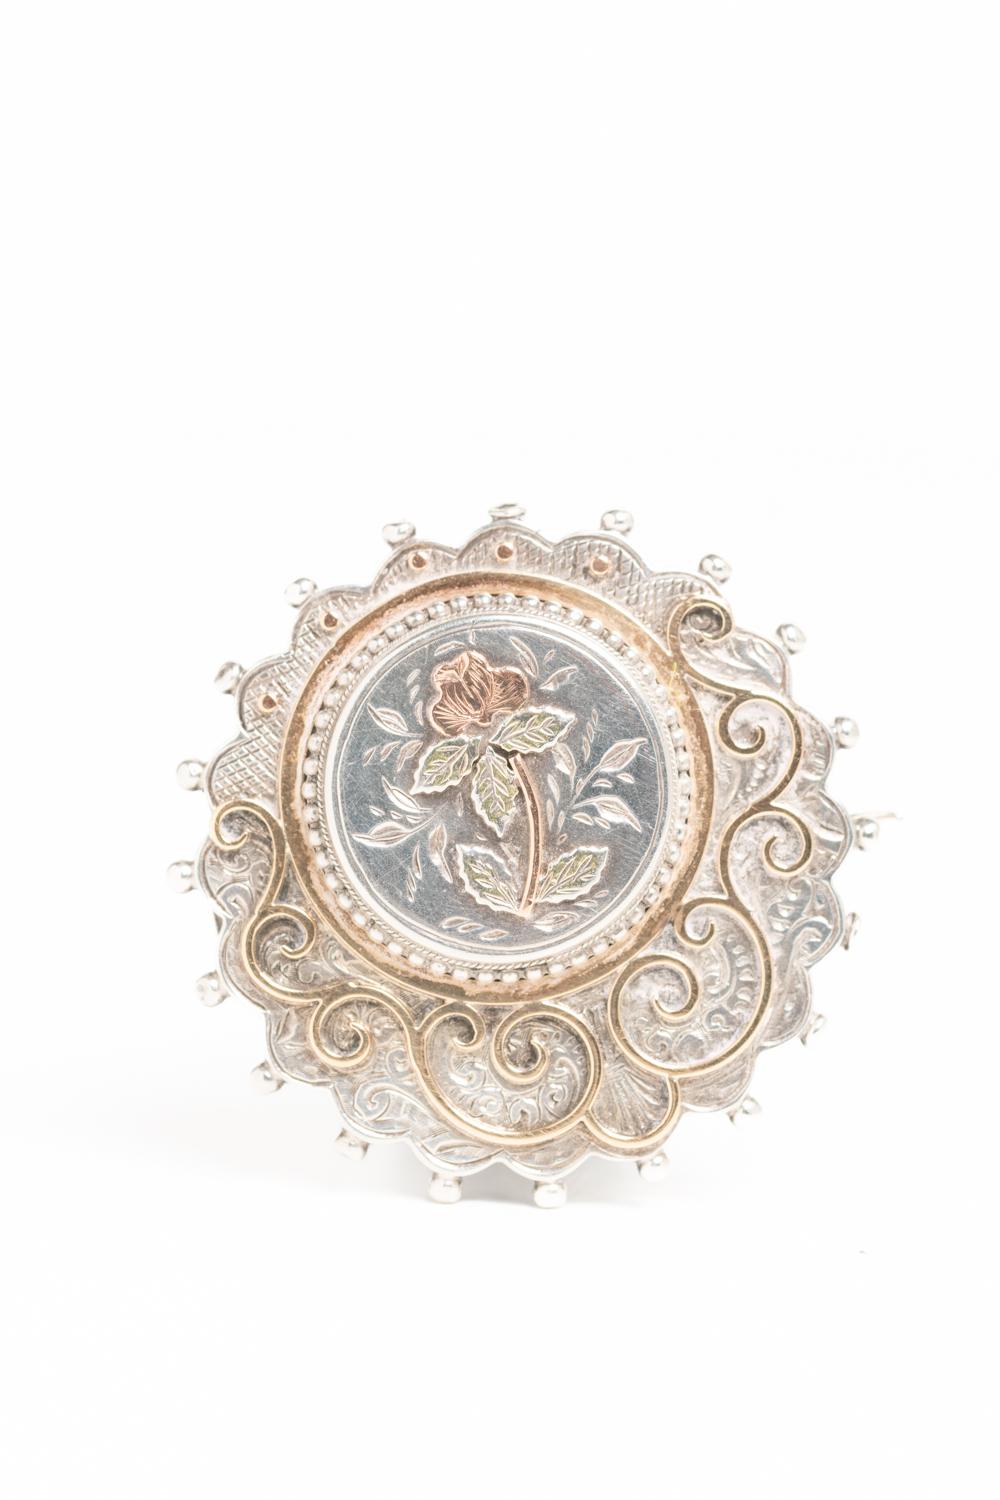 Victorian Silver & Gold Overlay Brooch with Rose Motif In Good Condition For Sale In Portland, England